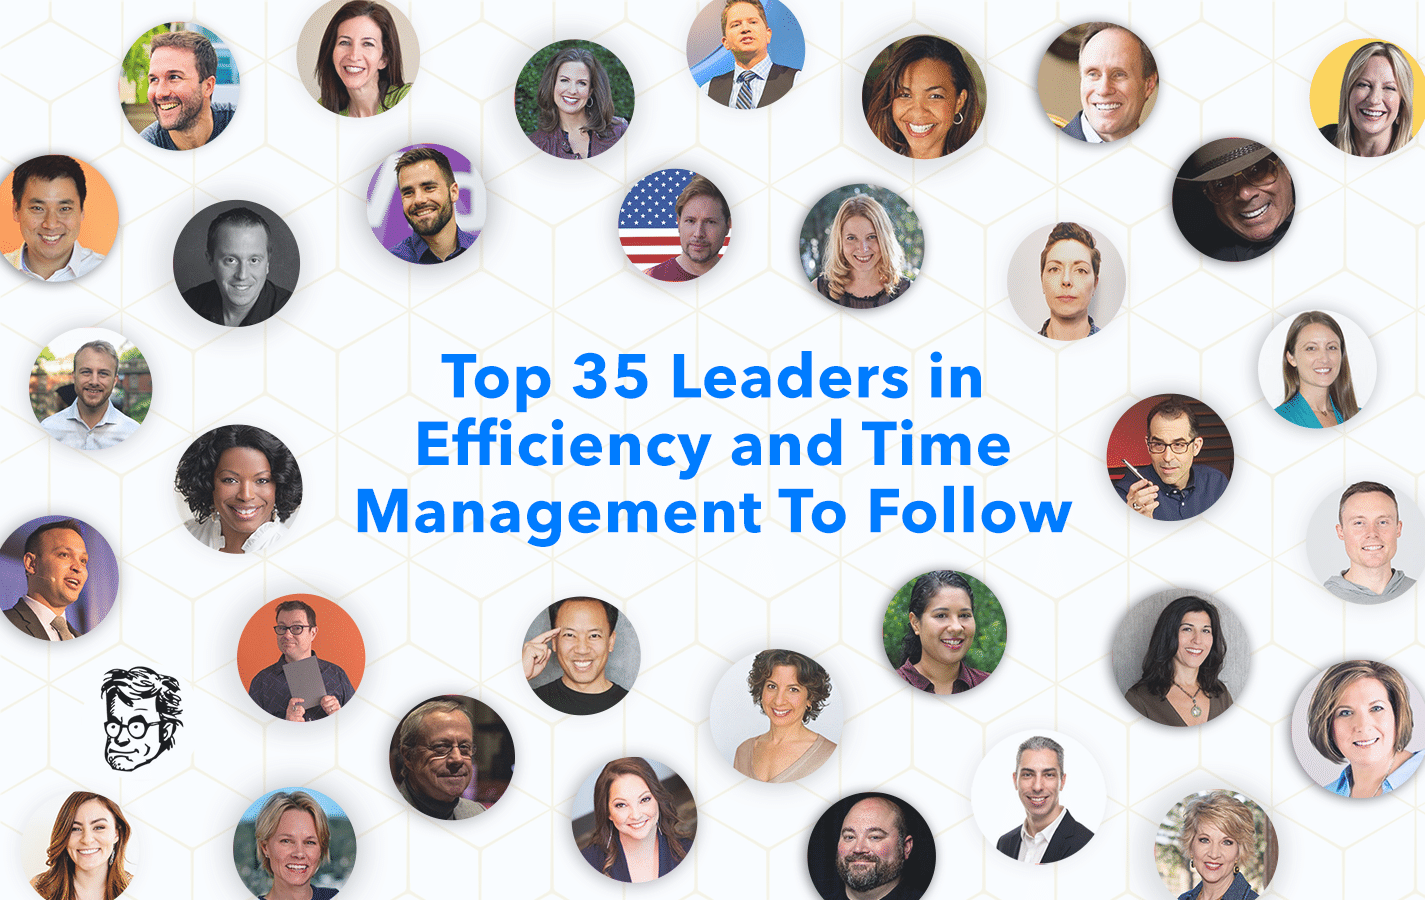 Top 35 Leaders in Efficiency and Time Management To Follow